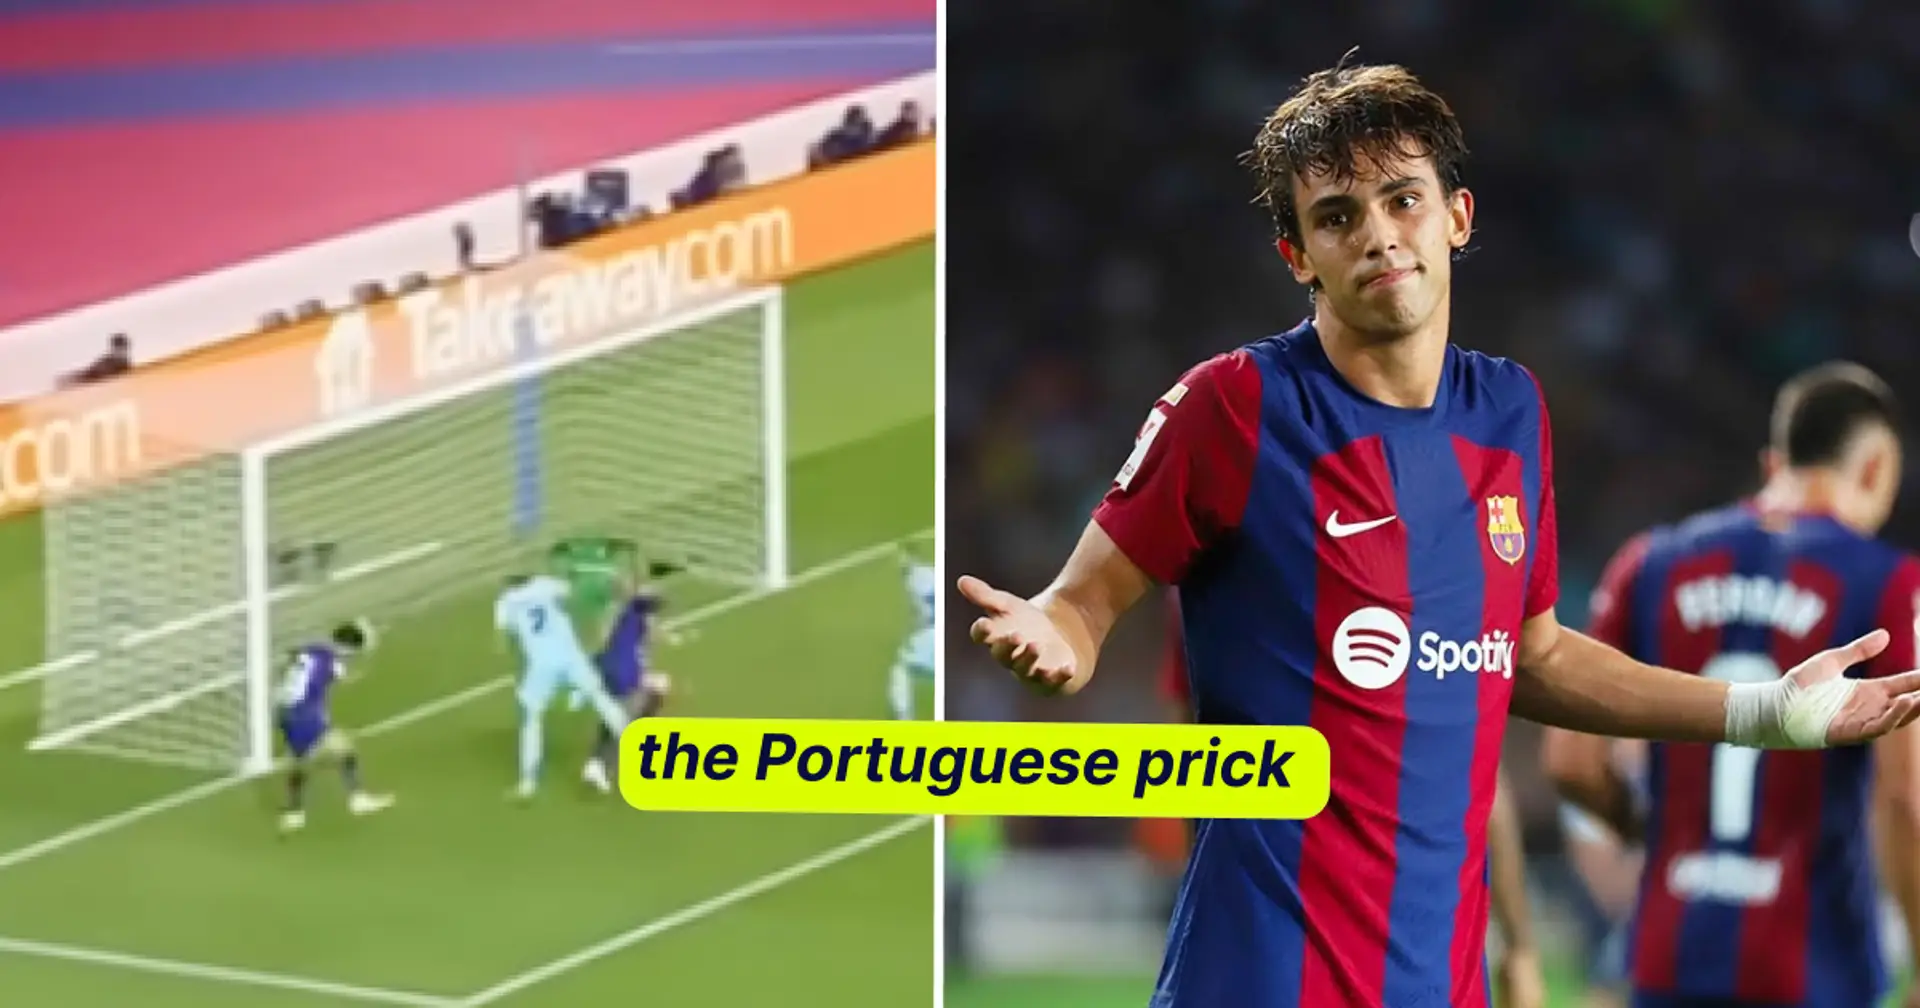 'There we go': What Atletico Madrid fans are saying about Joao Felix brilliant form at Barca